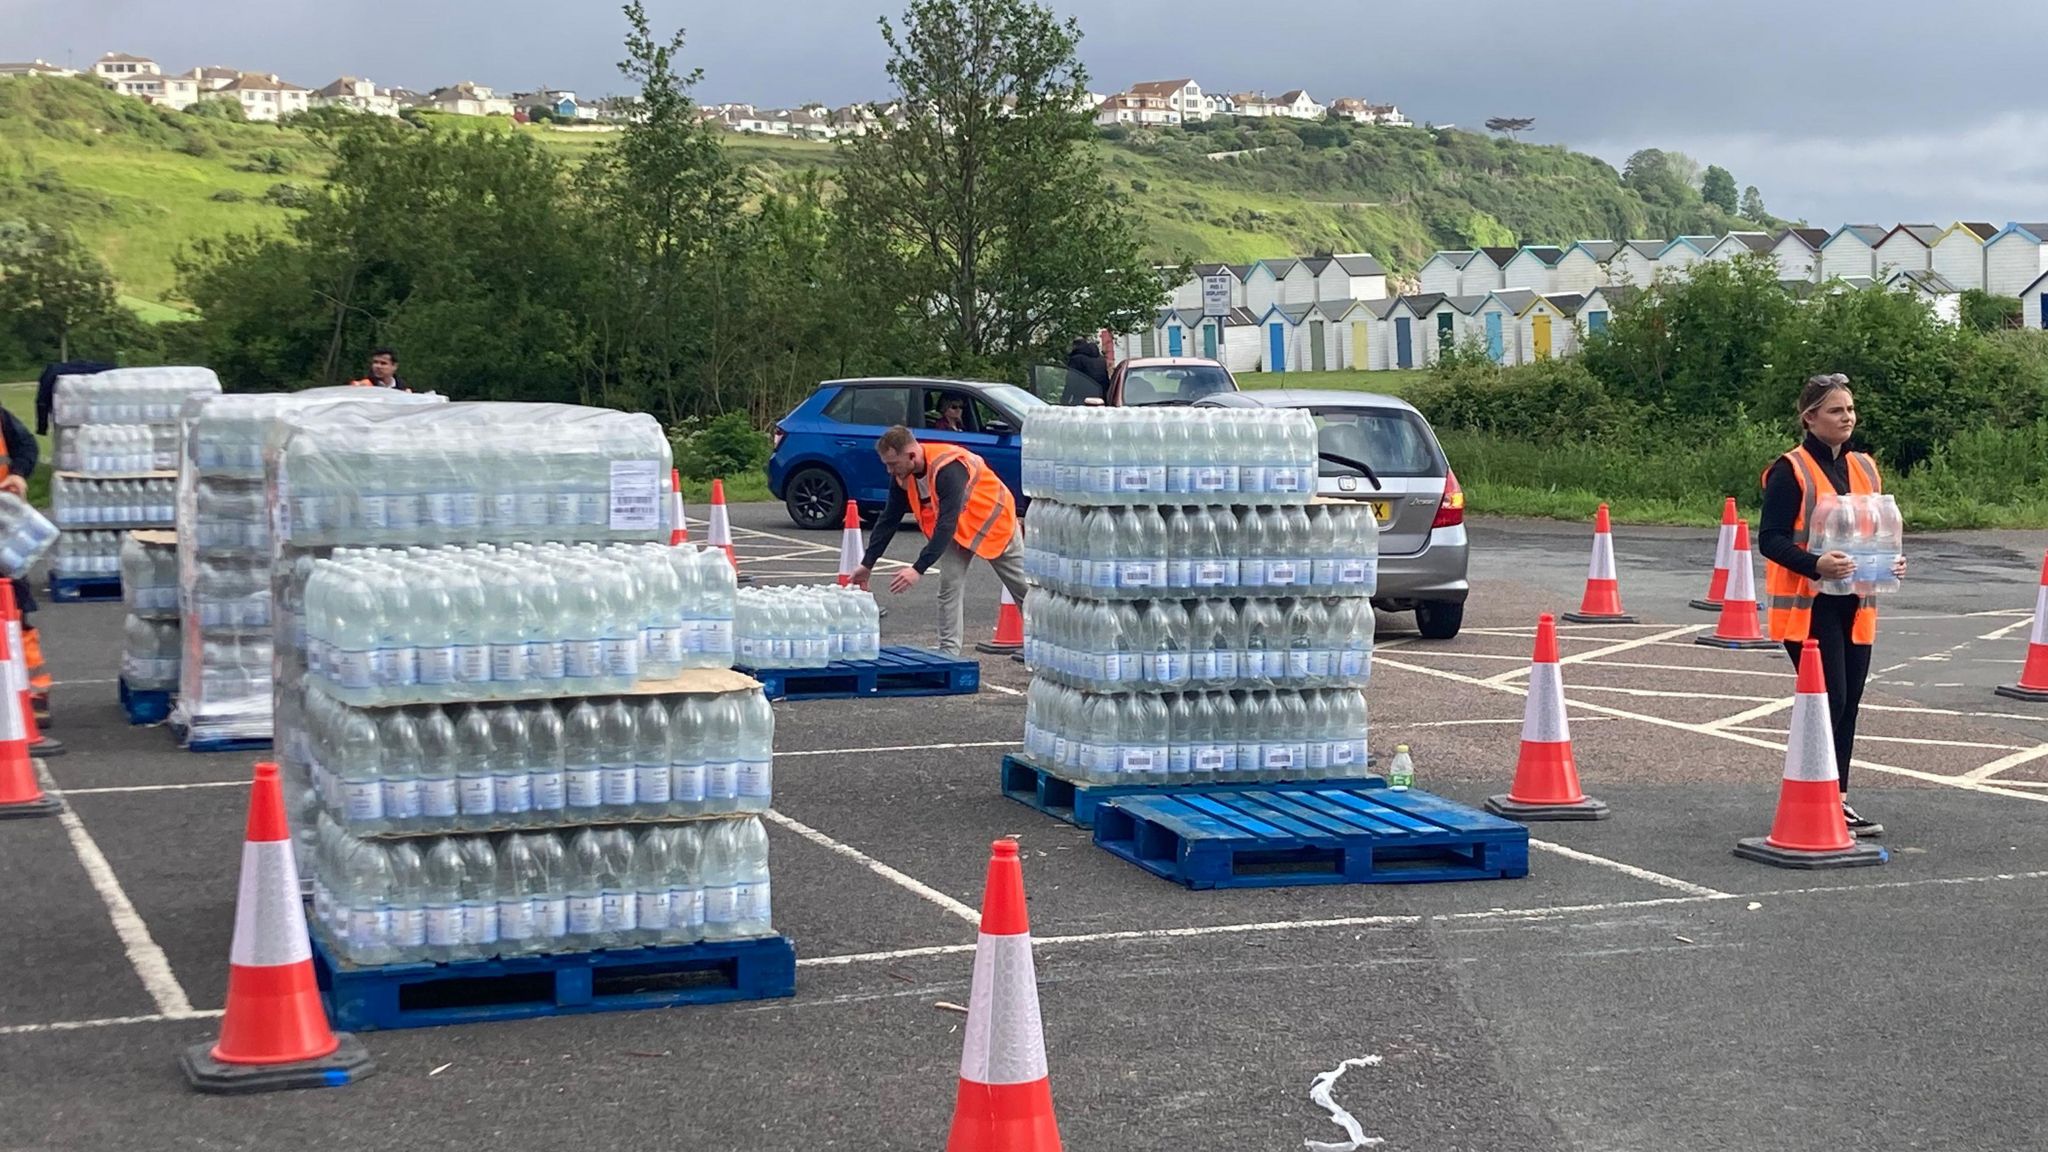 Packs of water bottles stacked on pallets in a car park 